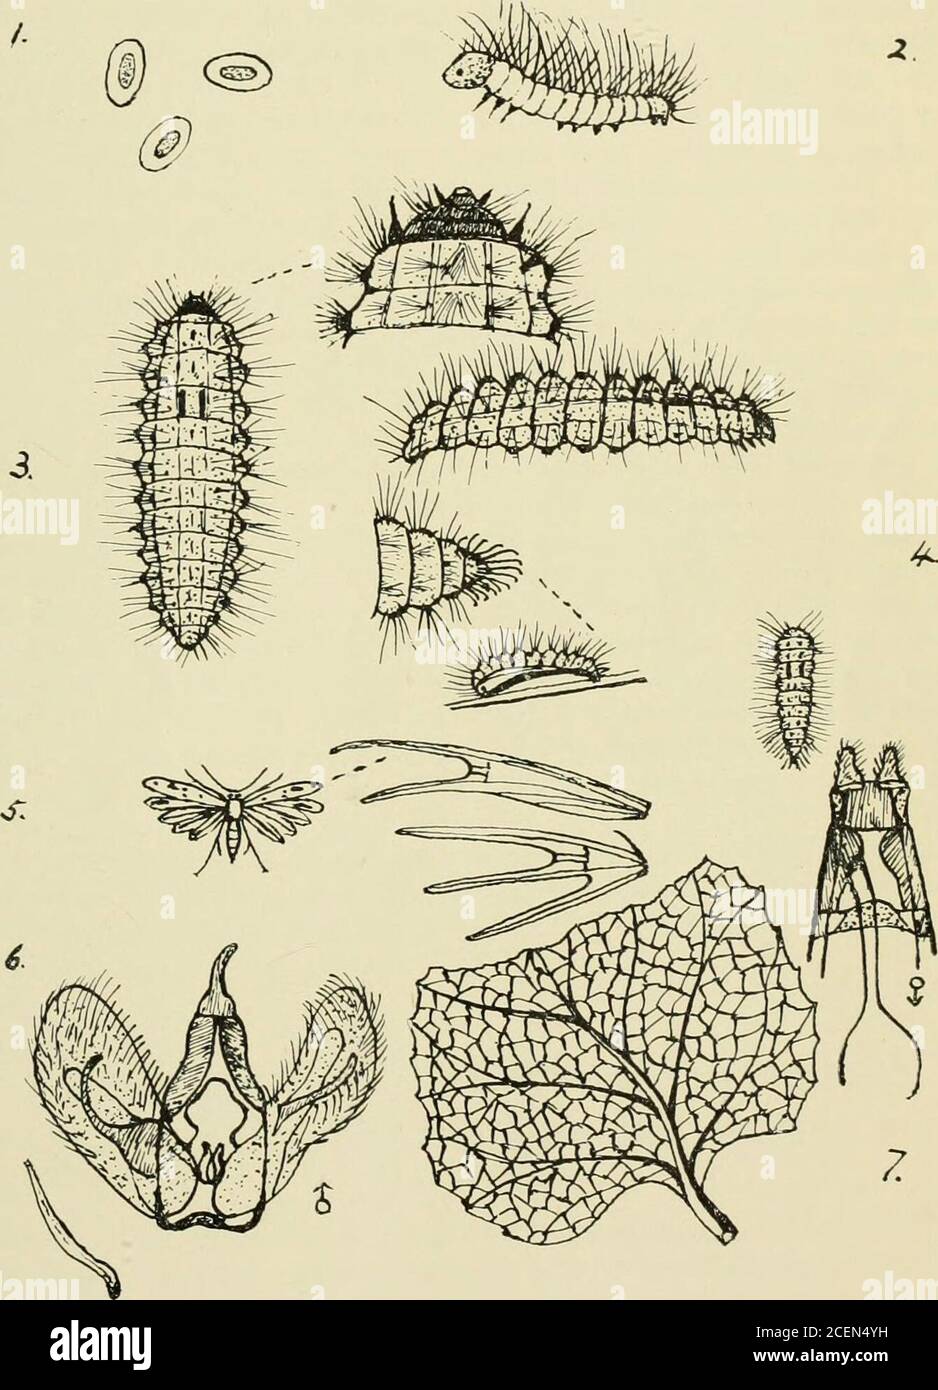 The Entomologist S Record And Journal Of Variation Of Underside Of Leaf Of Arctia Lappa L Burd Lt Ick Continental Migrant Butterflies In 1957 By Brigadier C G Jiipscomb D S O Service In B A O R Has